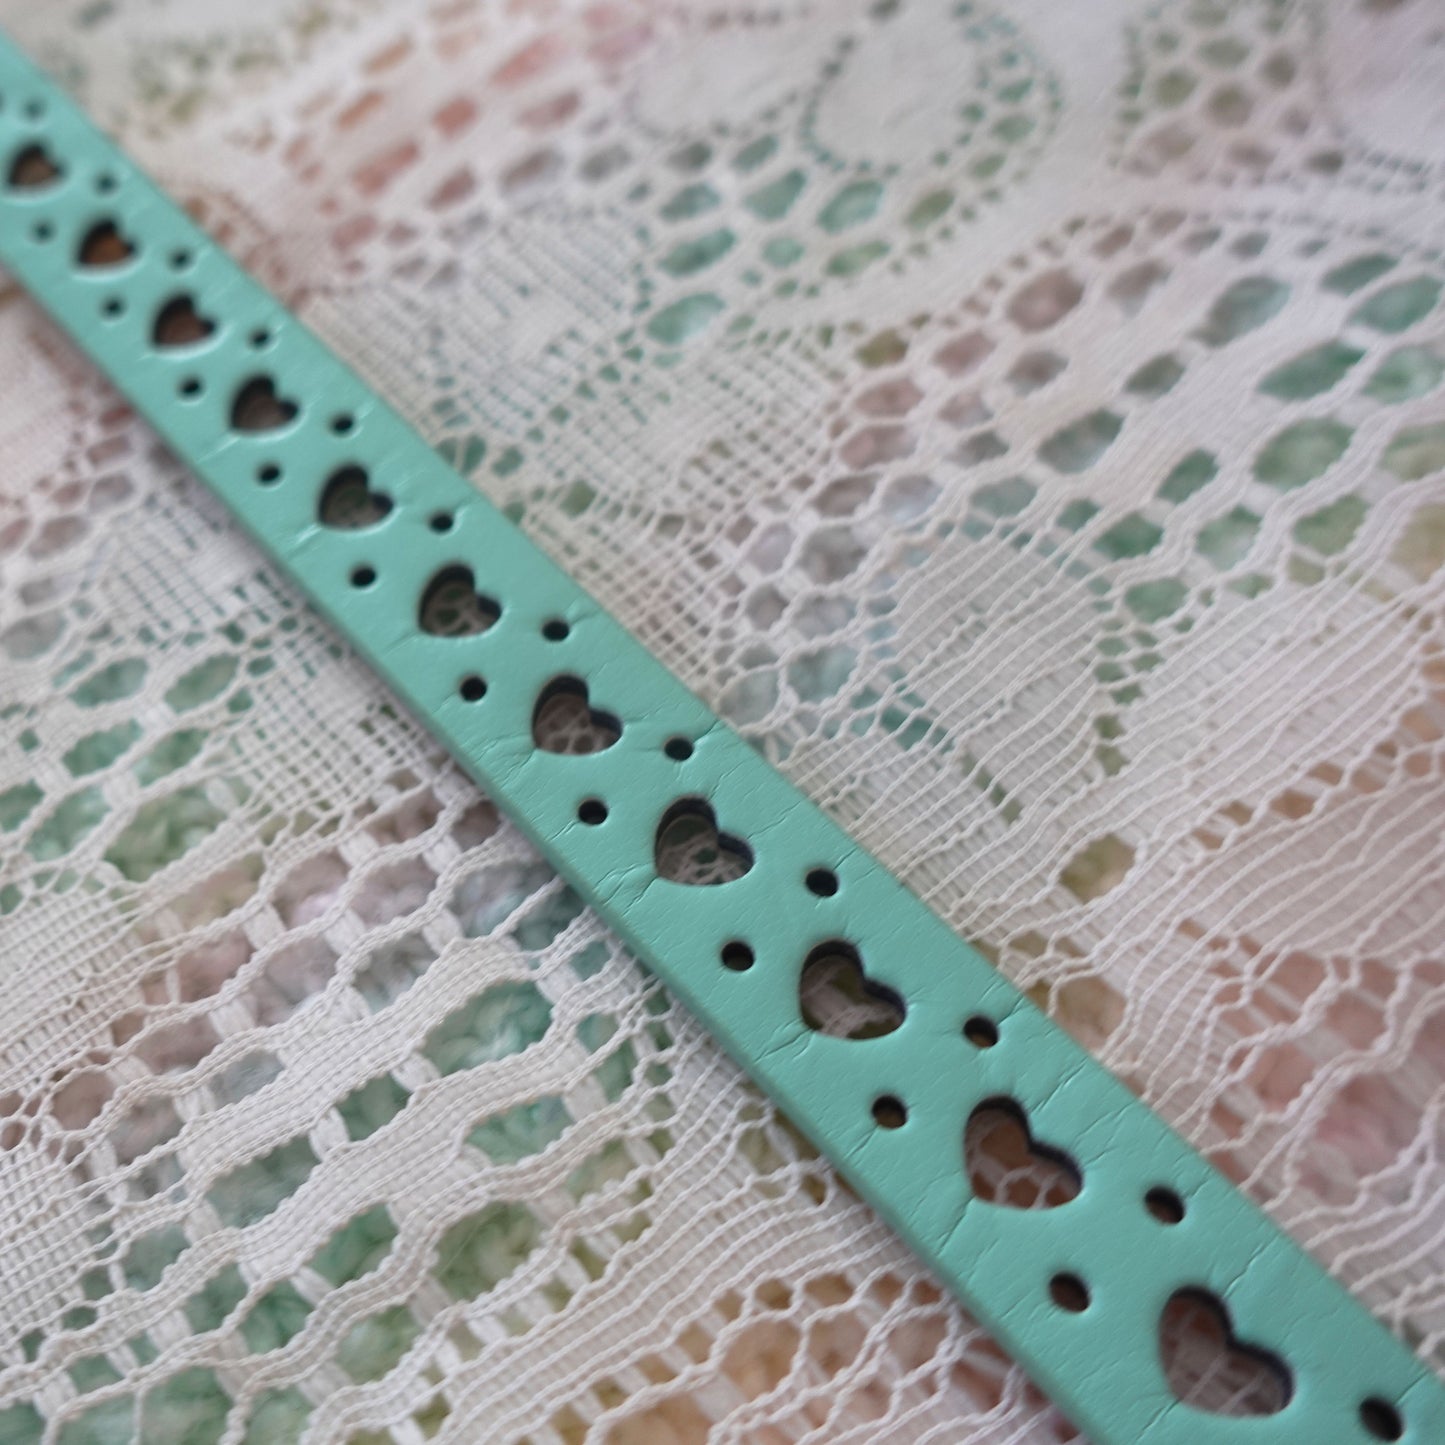 teal belt with heart cutouts